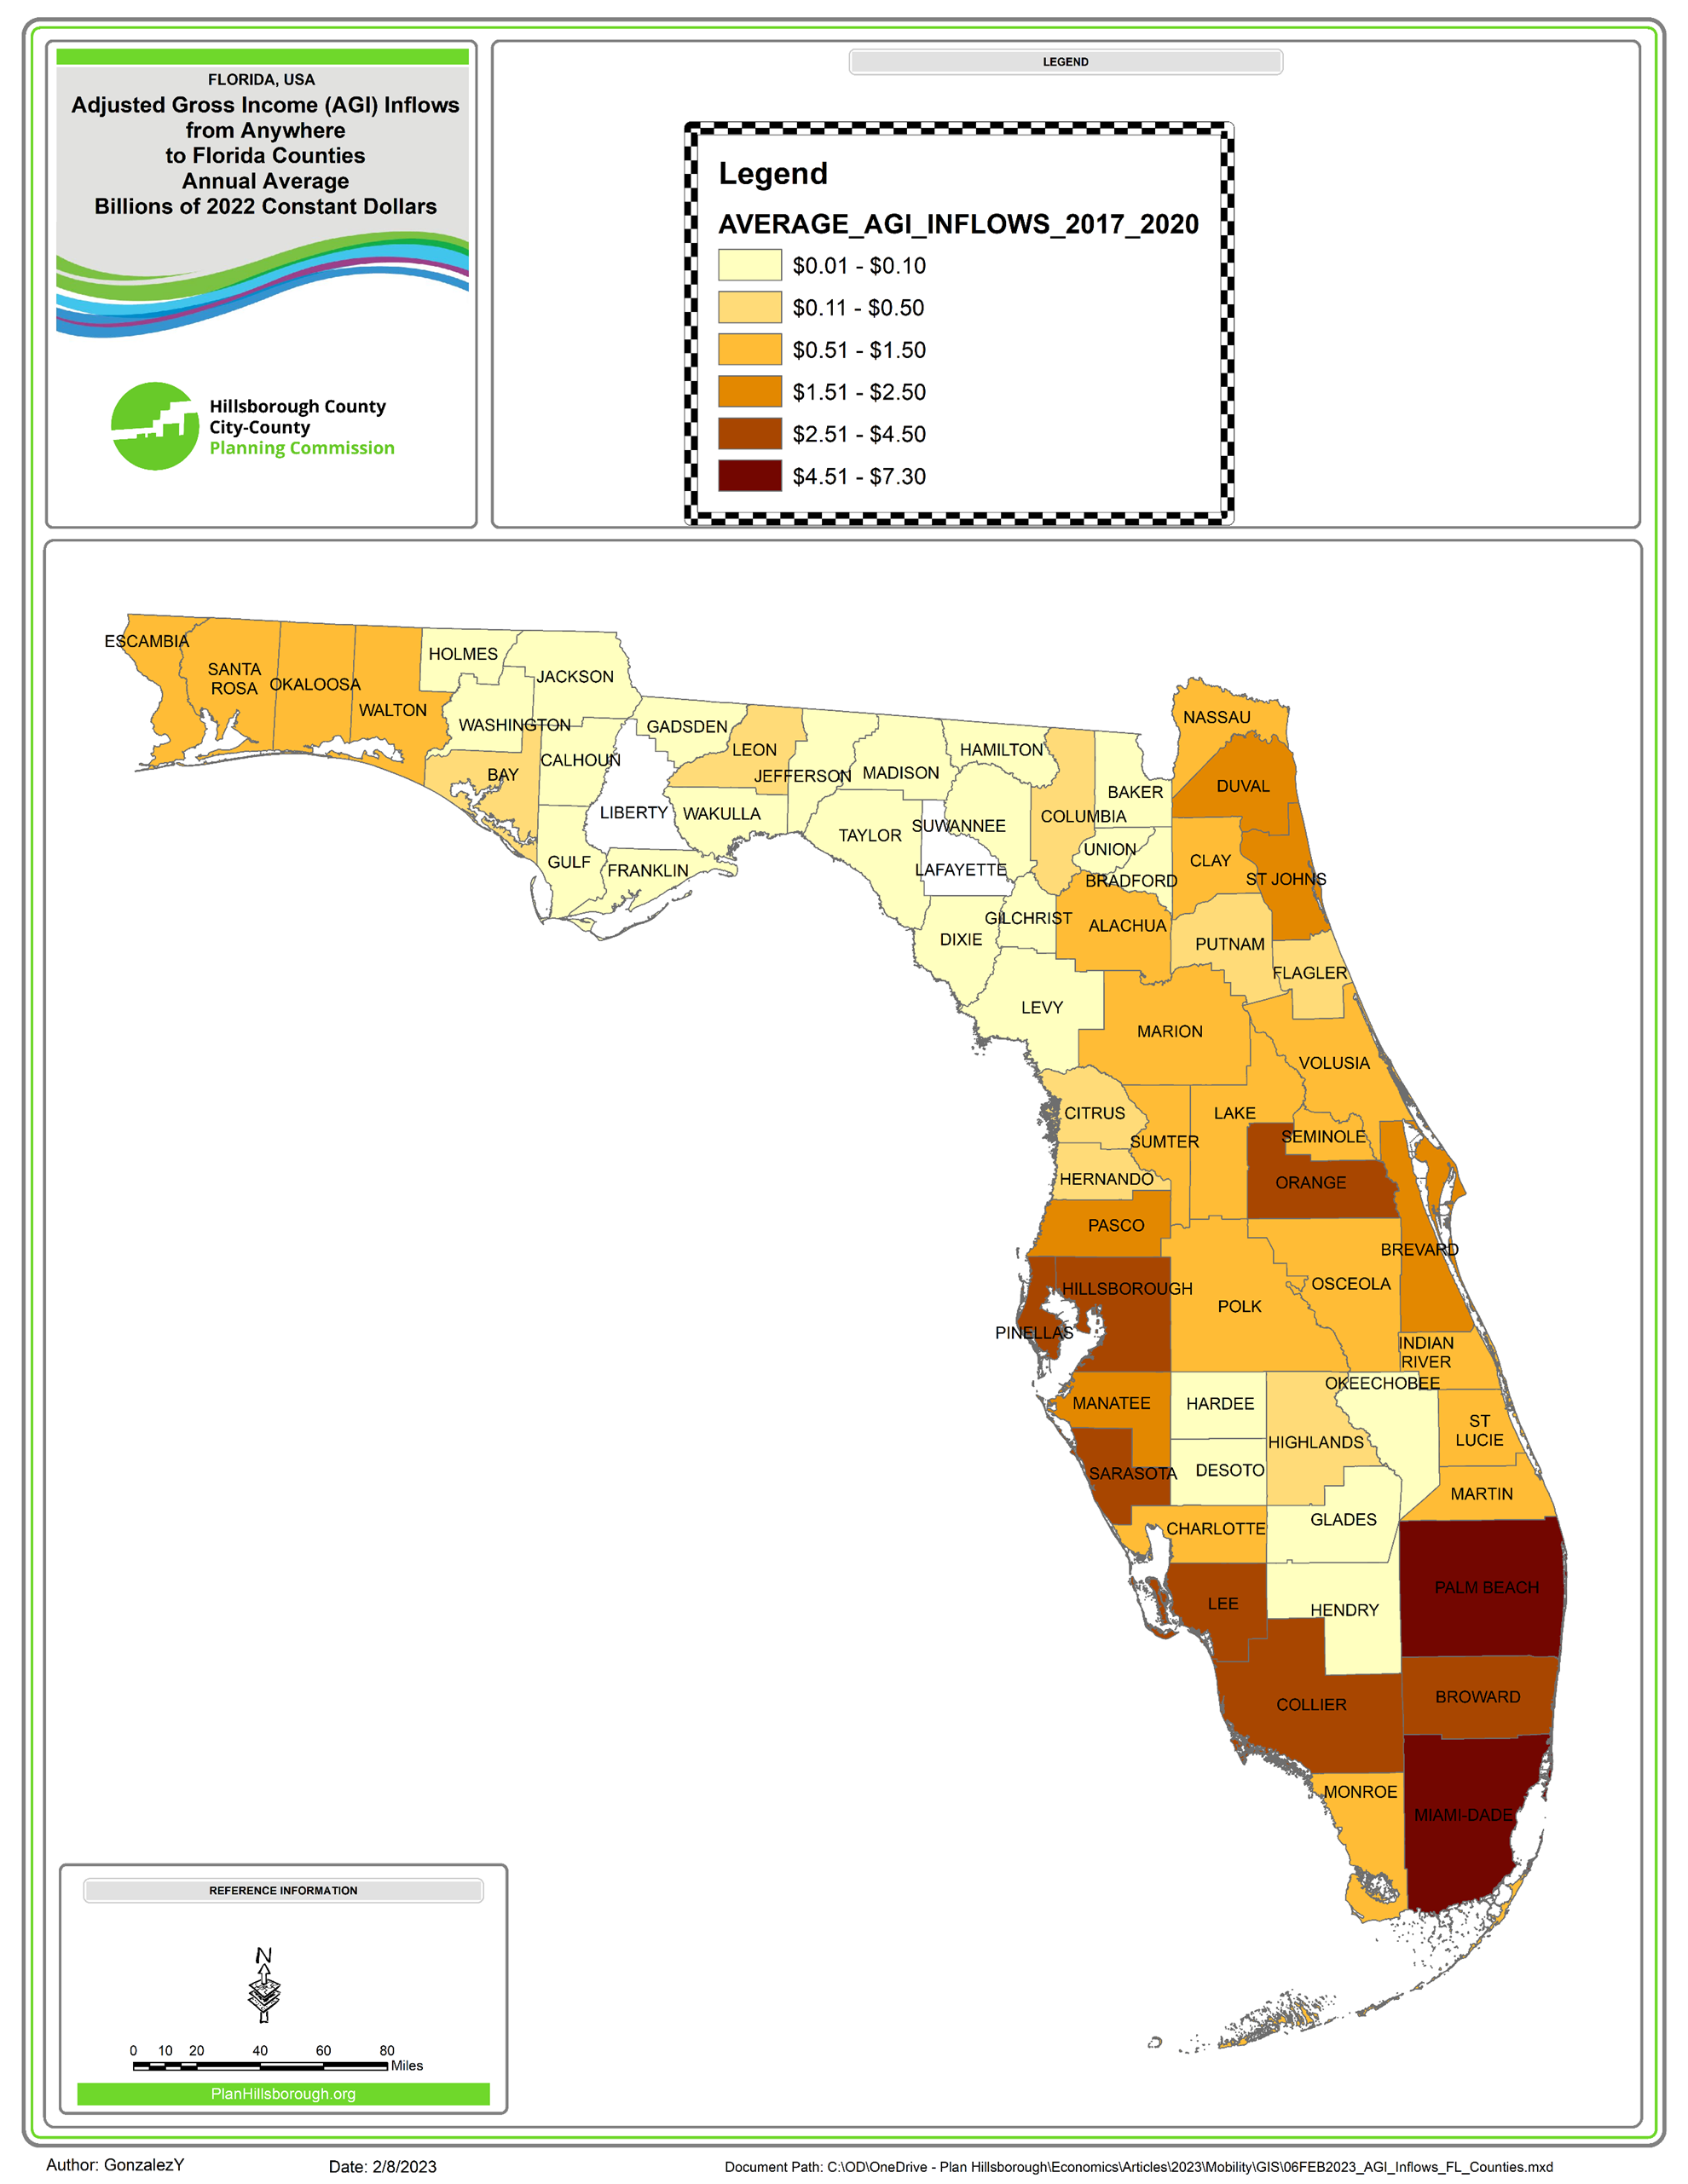 Map shows all Florida Counties. For each county, the map indicates how much AGI the county is attracting on annual basis. Hillsborough, Pinellas, and Sarasota receive over $2.51 billion new AGI per year.